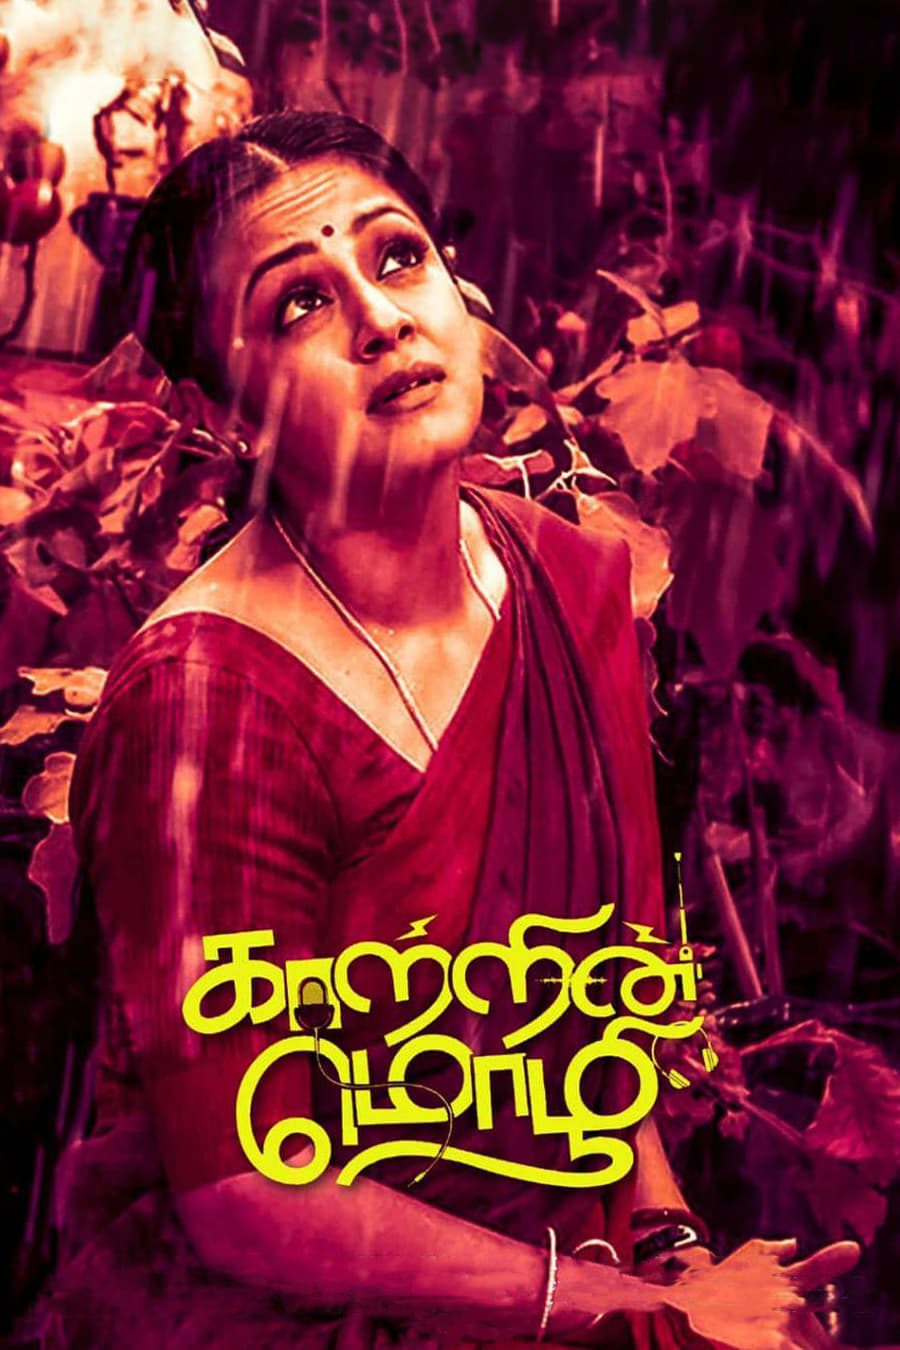 Poster for the movie "Kaatrin Mozhi"